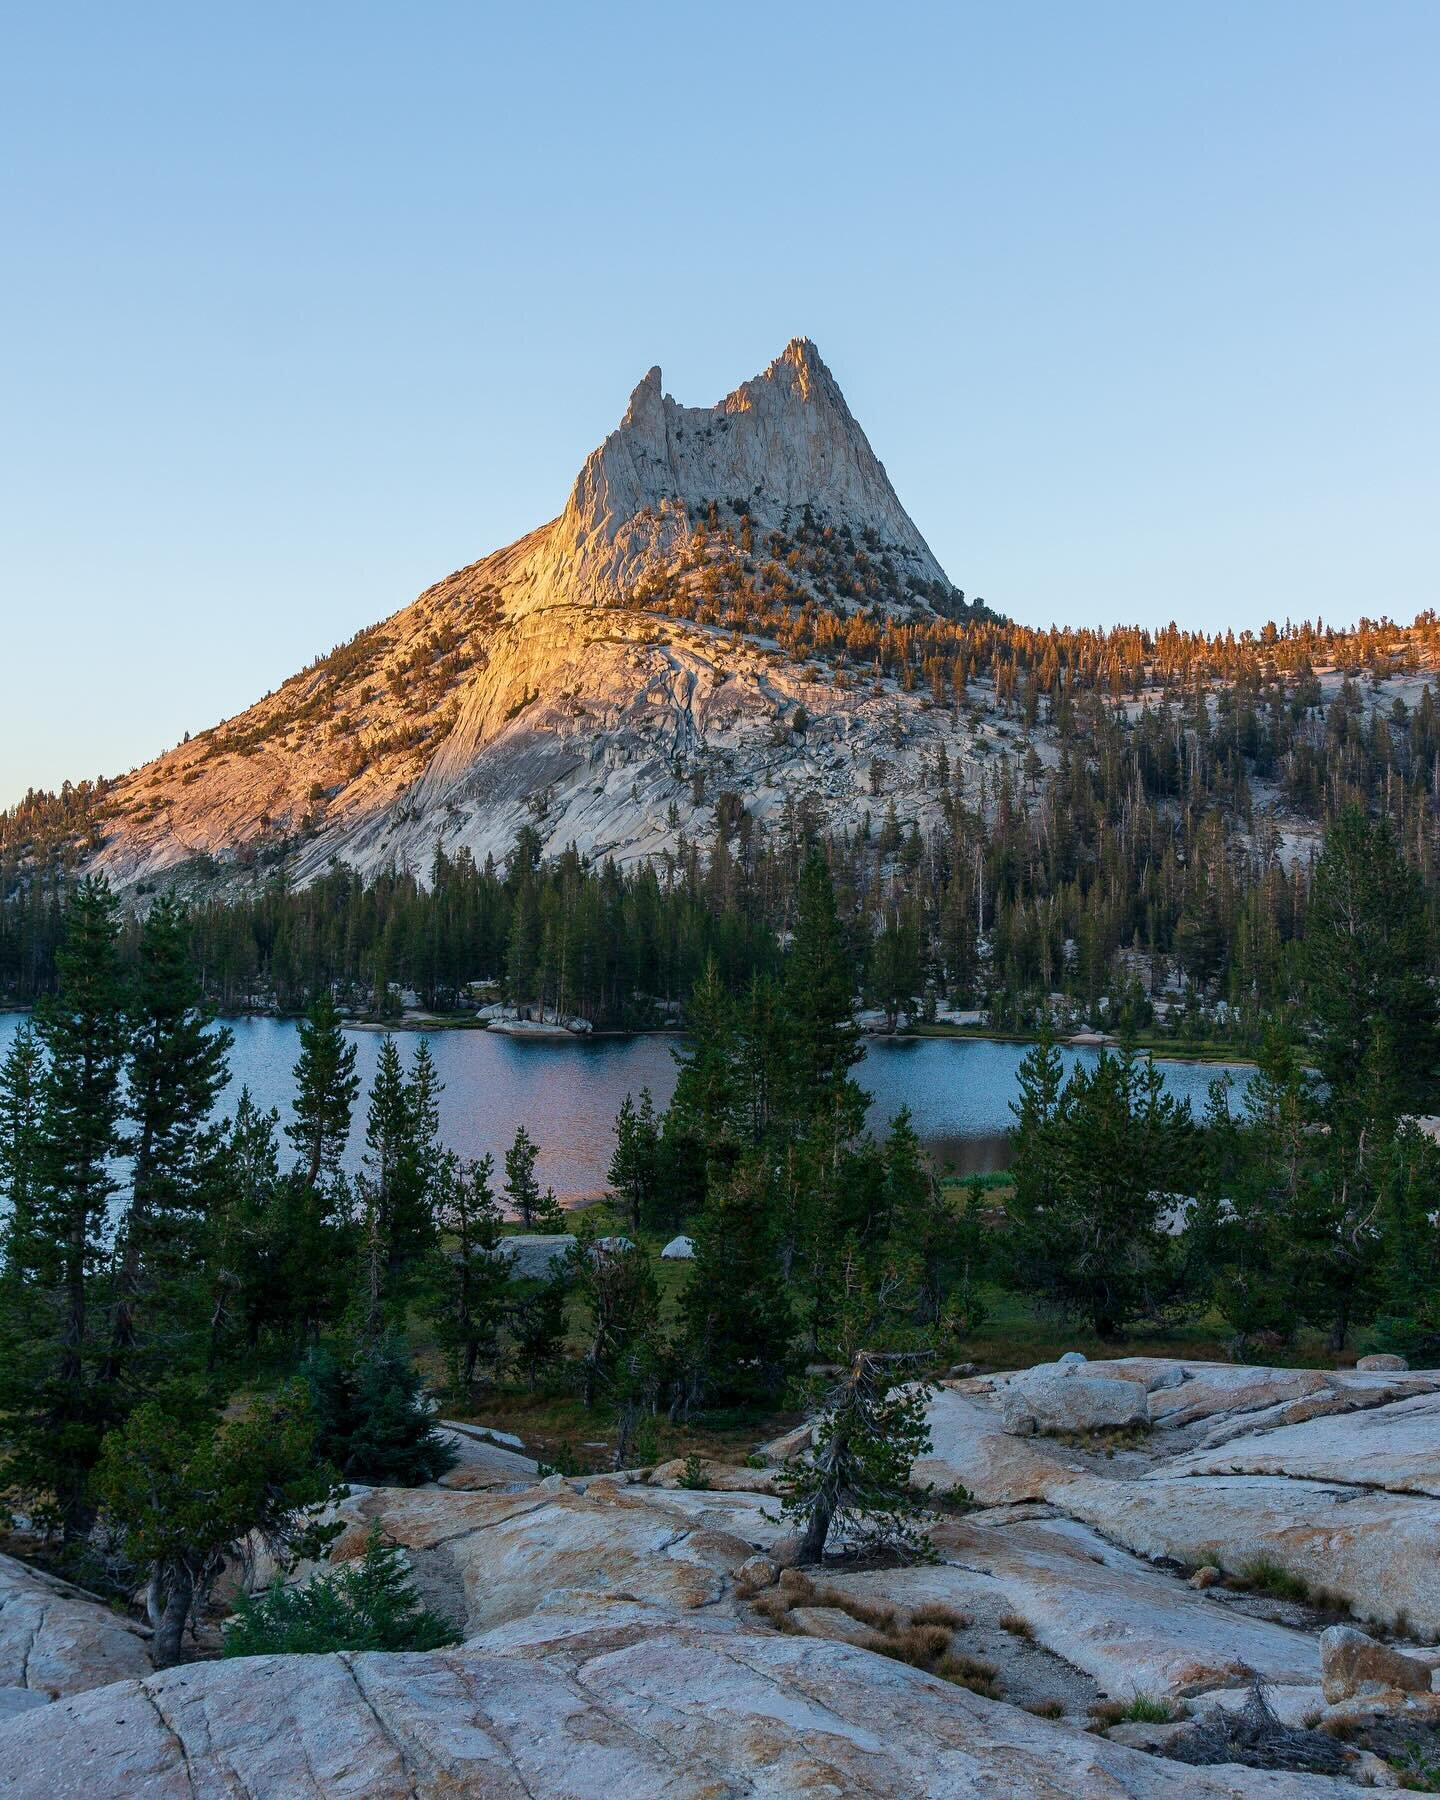 The BEST overnight backpacking trip in Yosemite National Park ⬇️&nbsp;You&rsquo;ll want to save this for future reference!

📍Upper Cathedral Lake

Cathedral Lakes are located right off the John Muir Trail in the Tuolumne Meadows area of Yosemite Nat